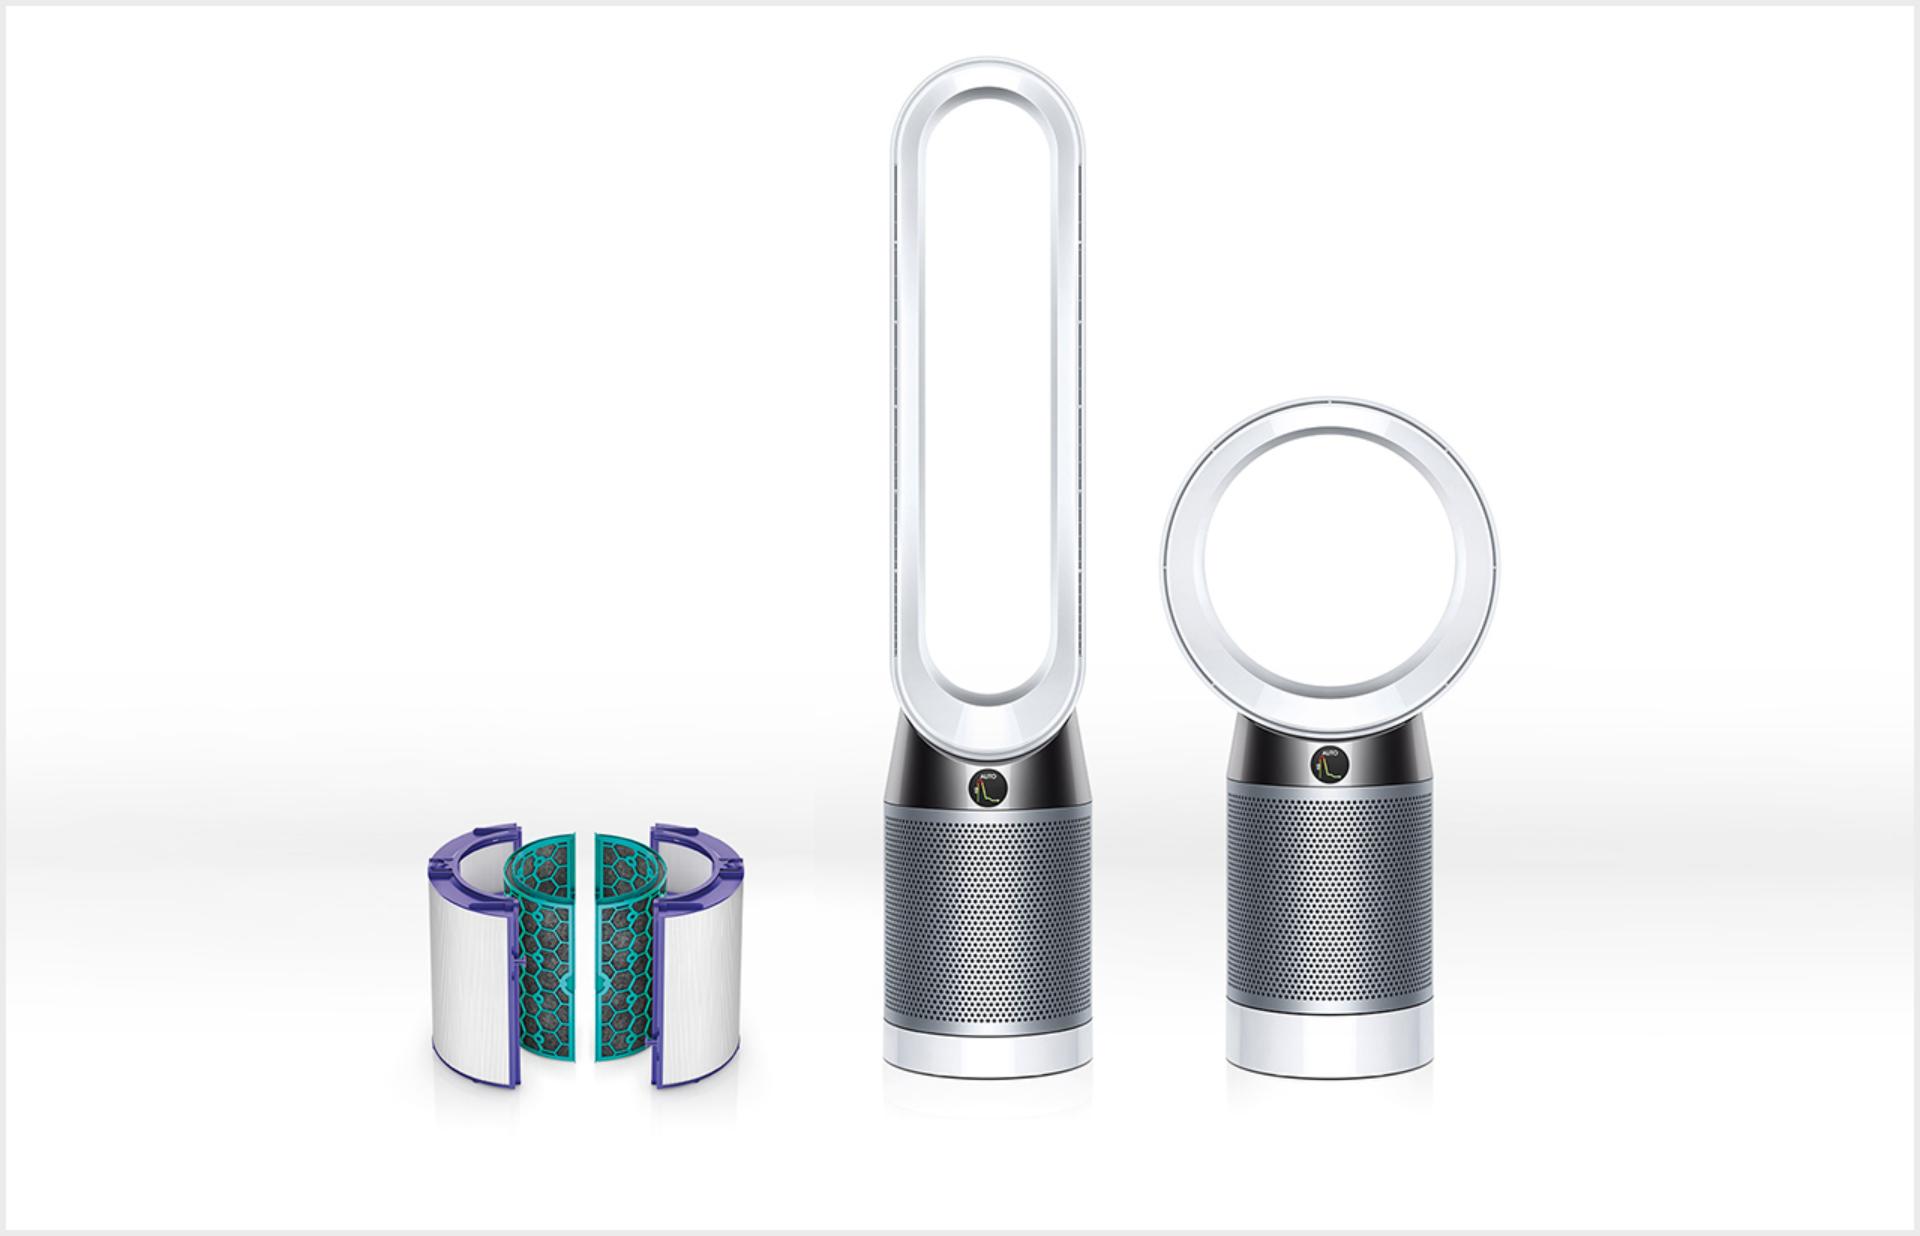 A Dyson purifier range in a row including a filter